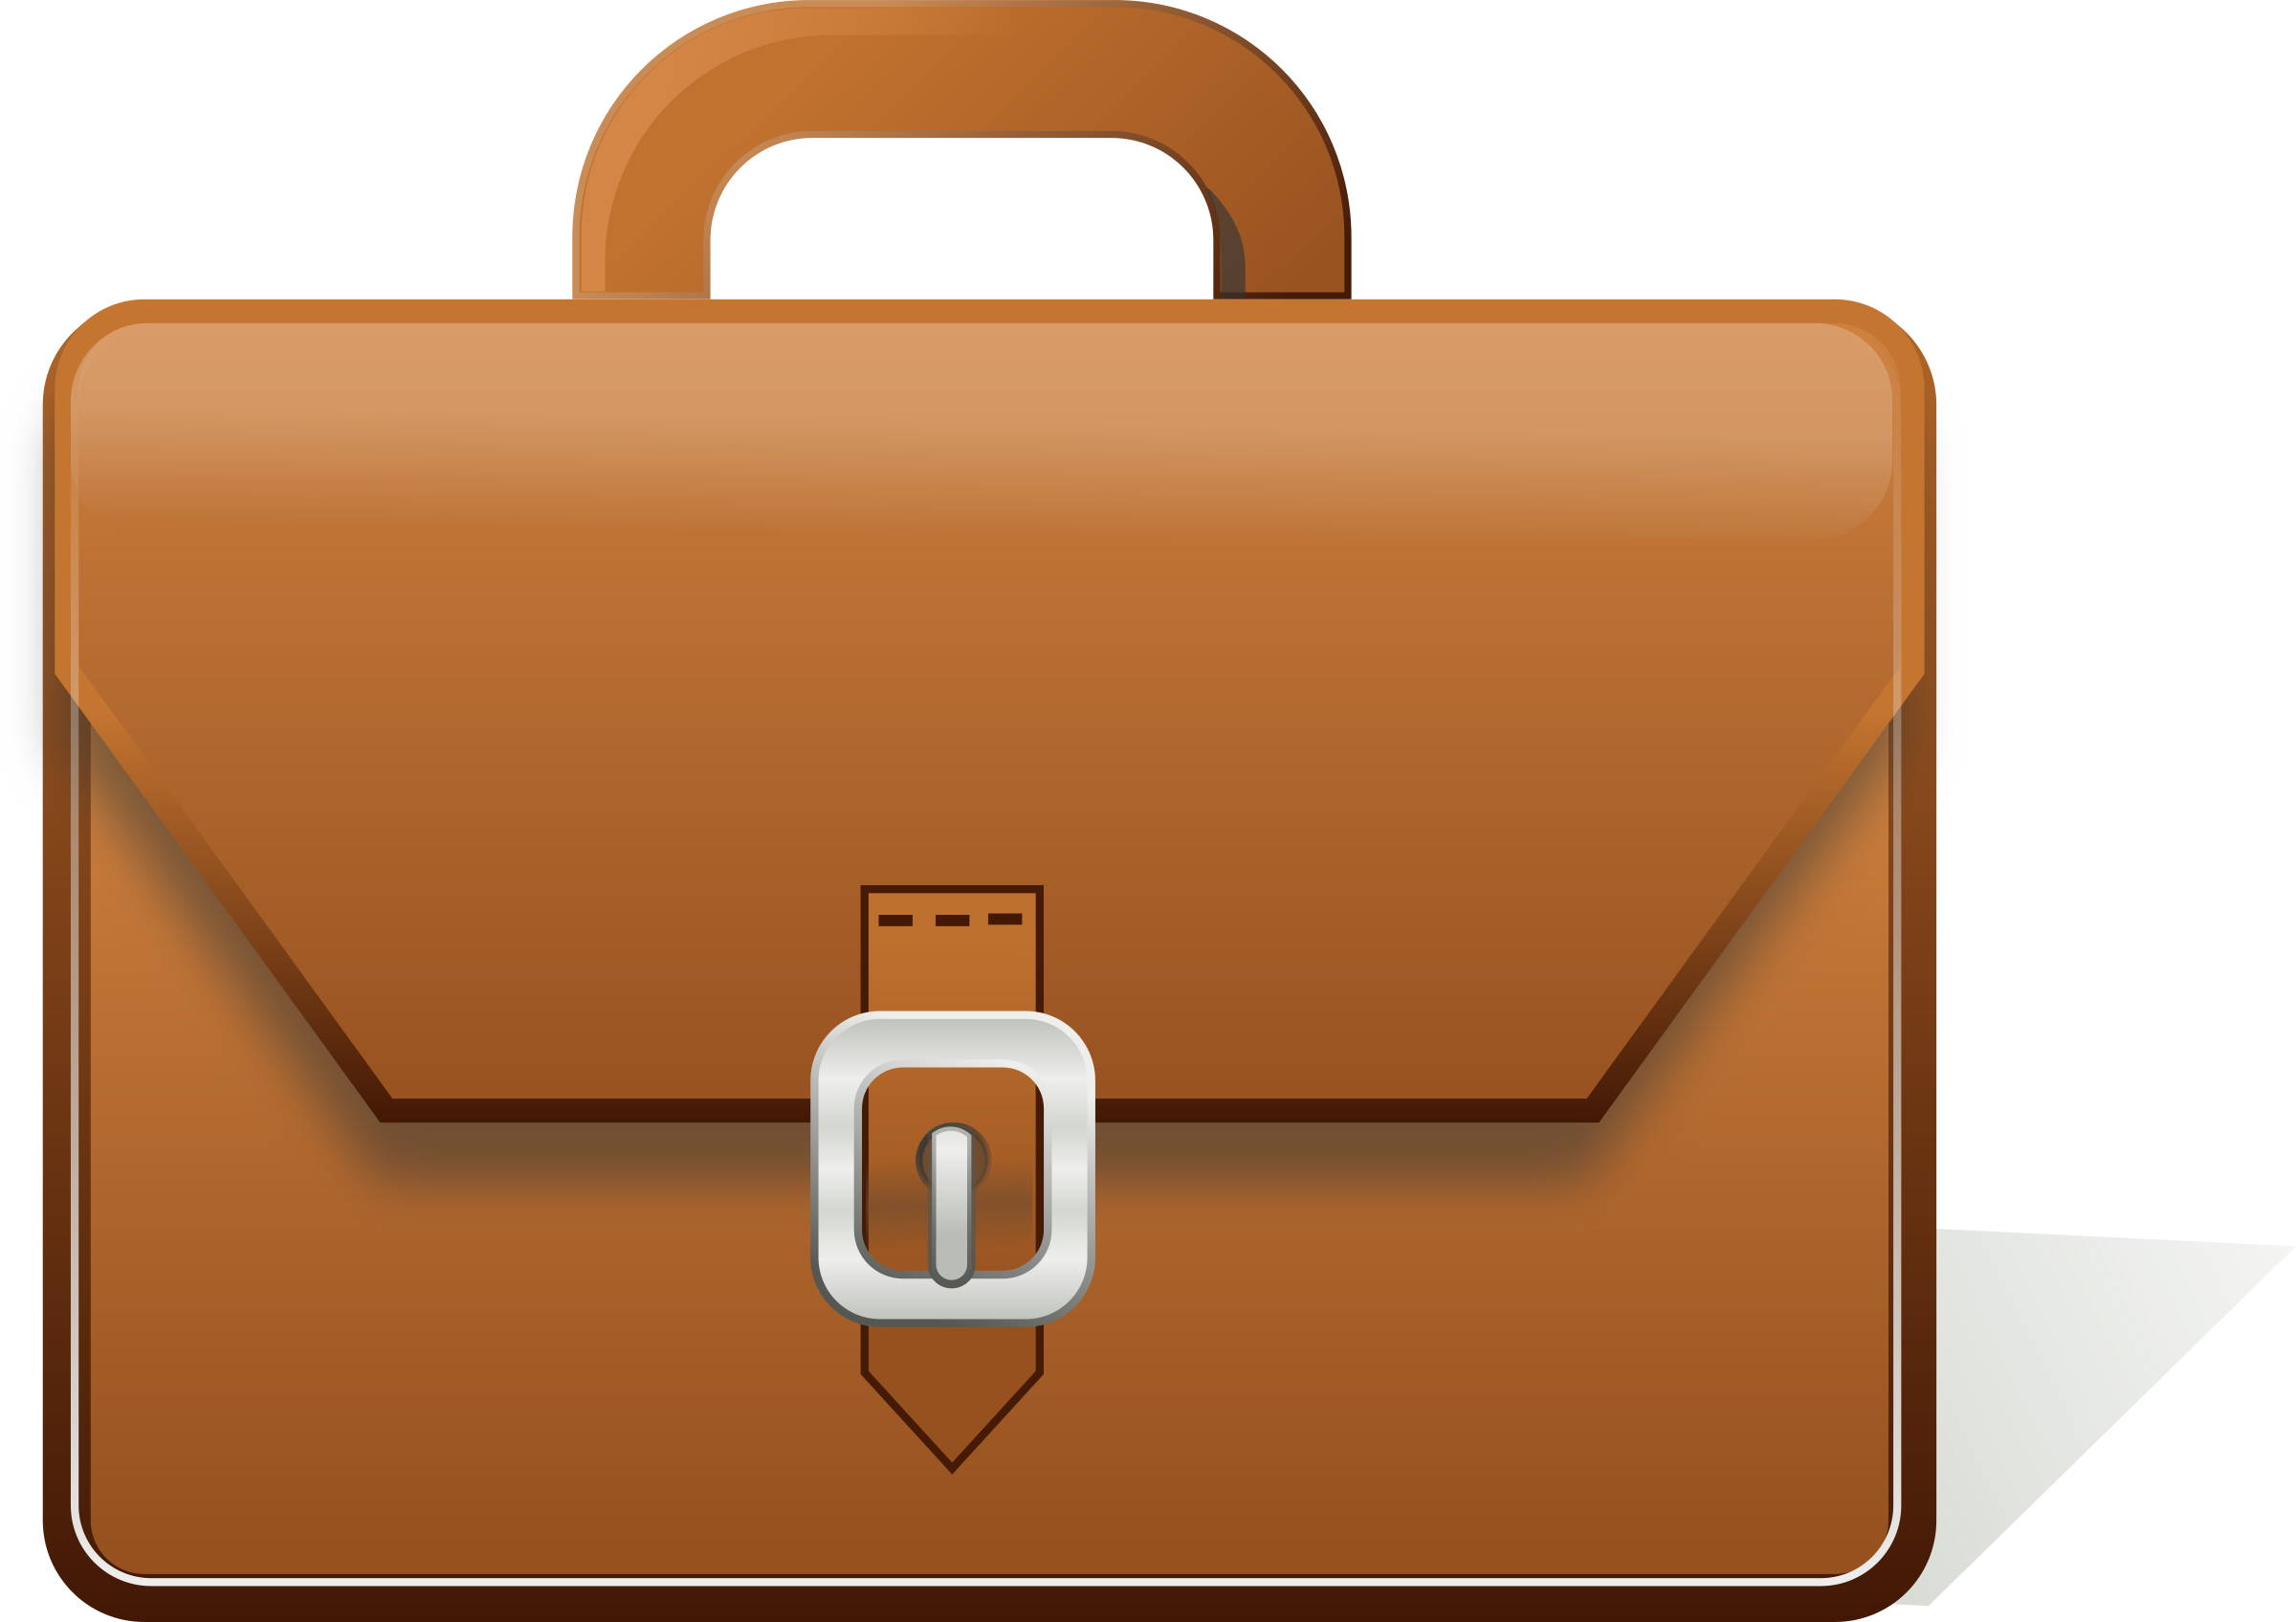 Big Image (Png) - Briefcase, Transparent background PNG HD thumbnail